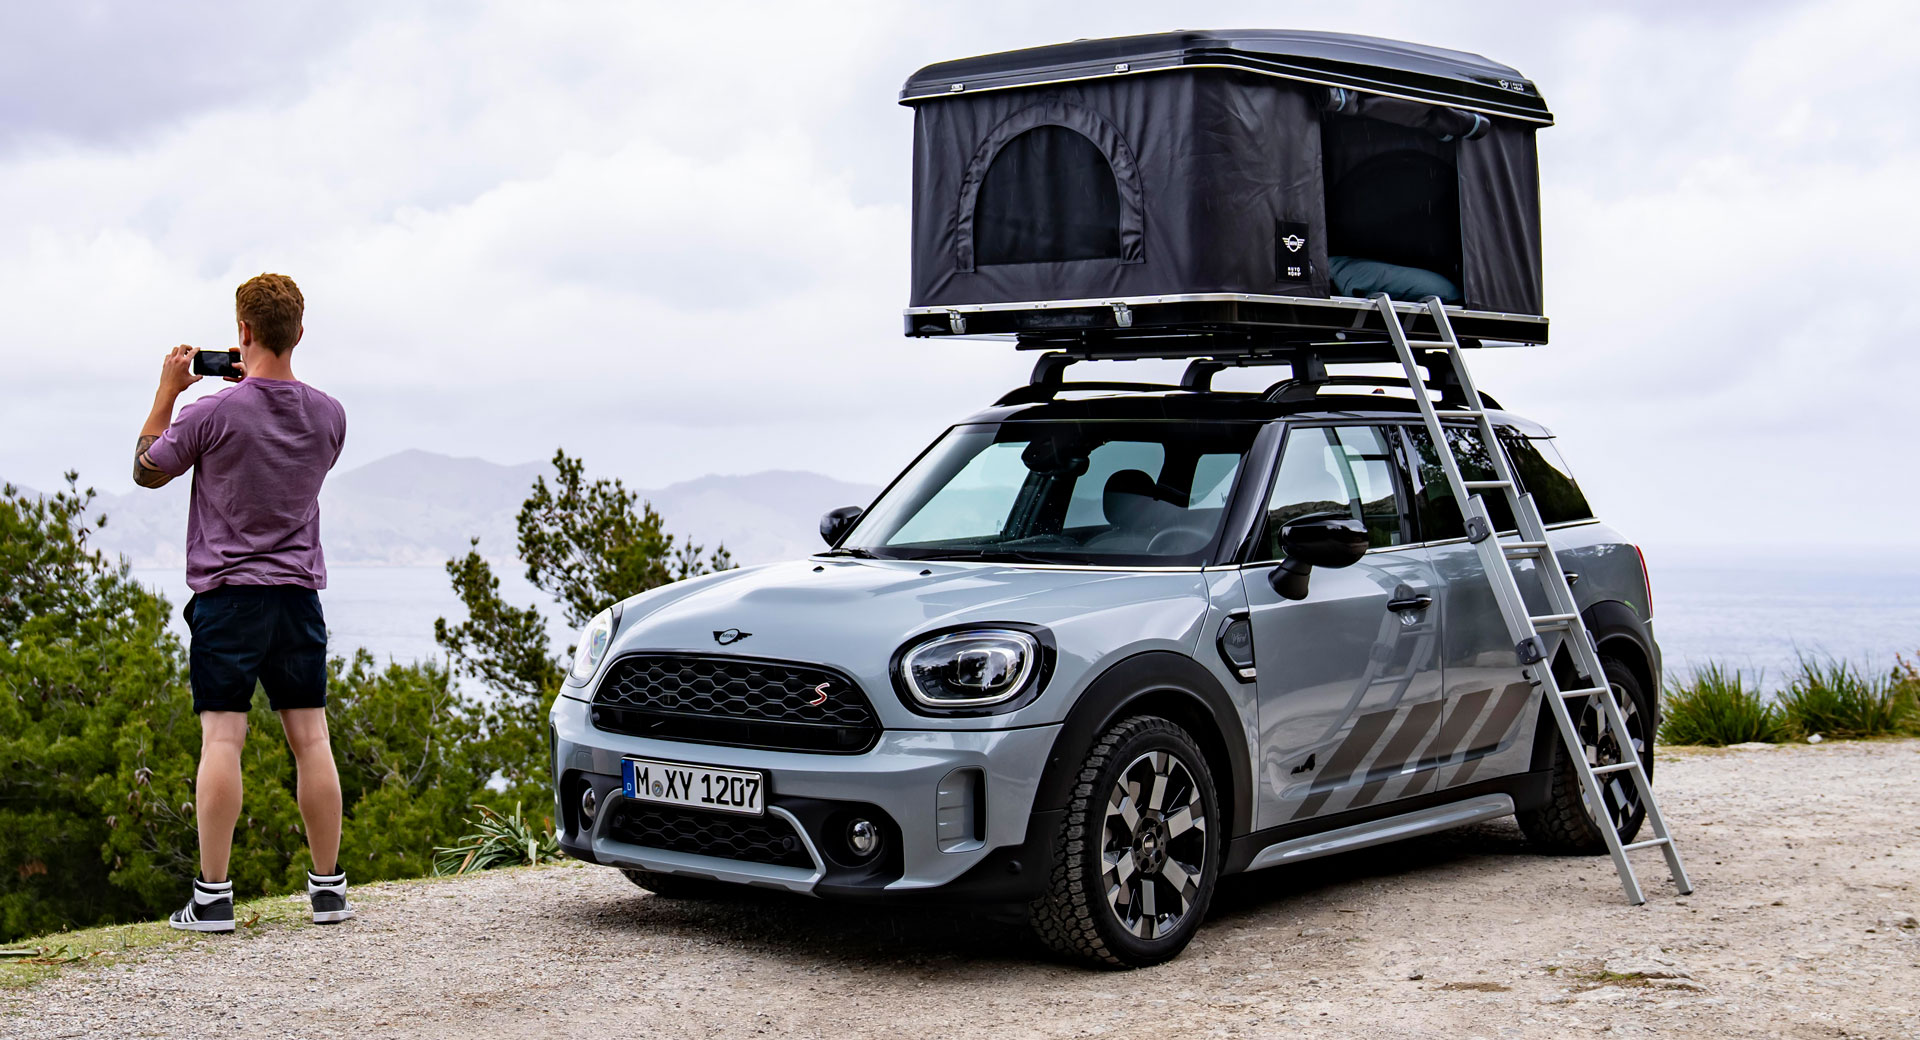 https://www.carscoops.com/wp-content/uploads/2022/05/MINI-Countryman-Individual-Accessories-155.jpg